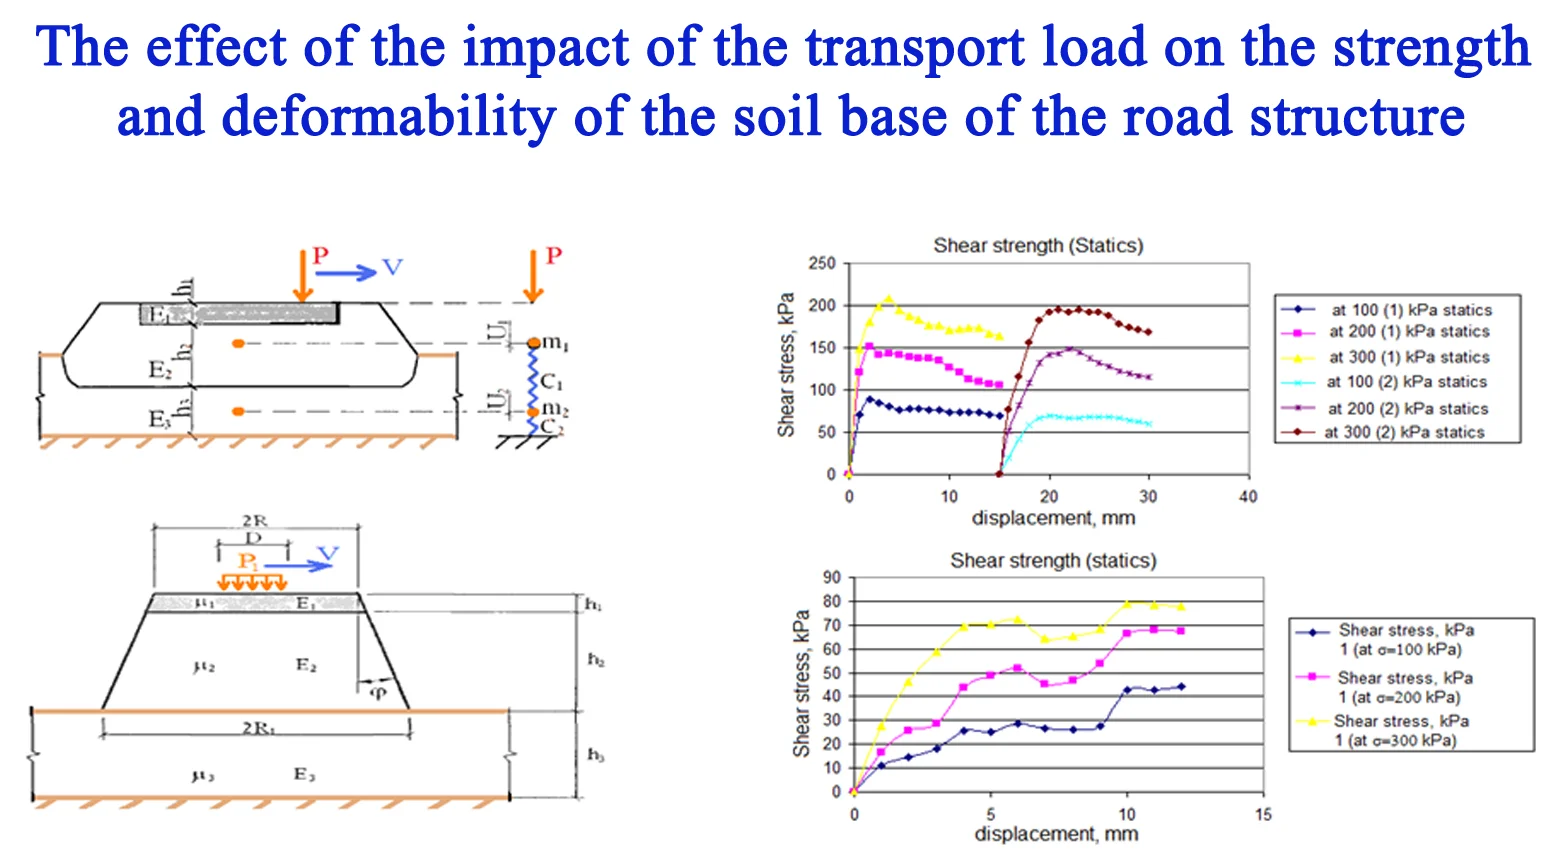 The effect of the impact of the transport load on the strength and deformability of the soil base of the road structure